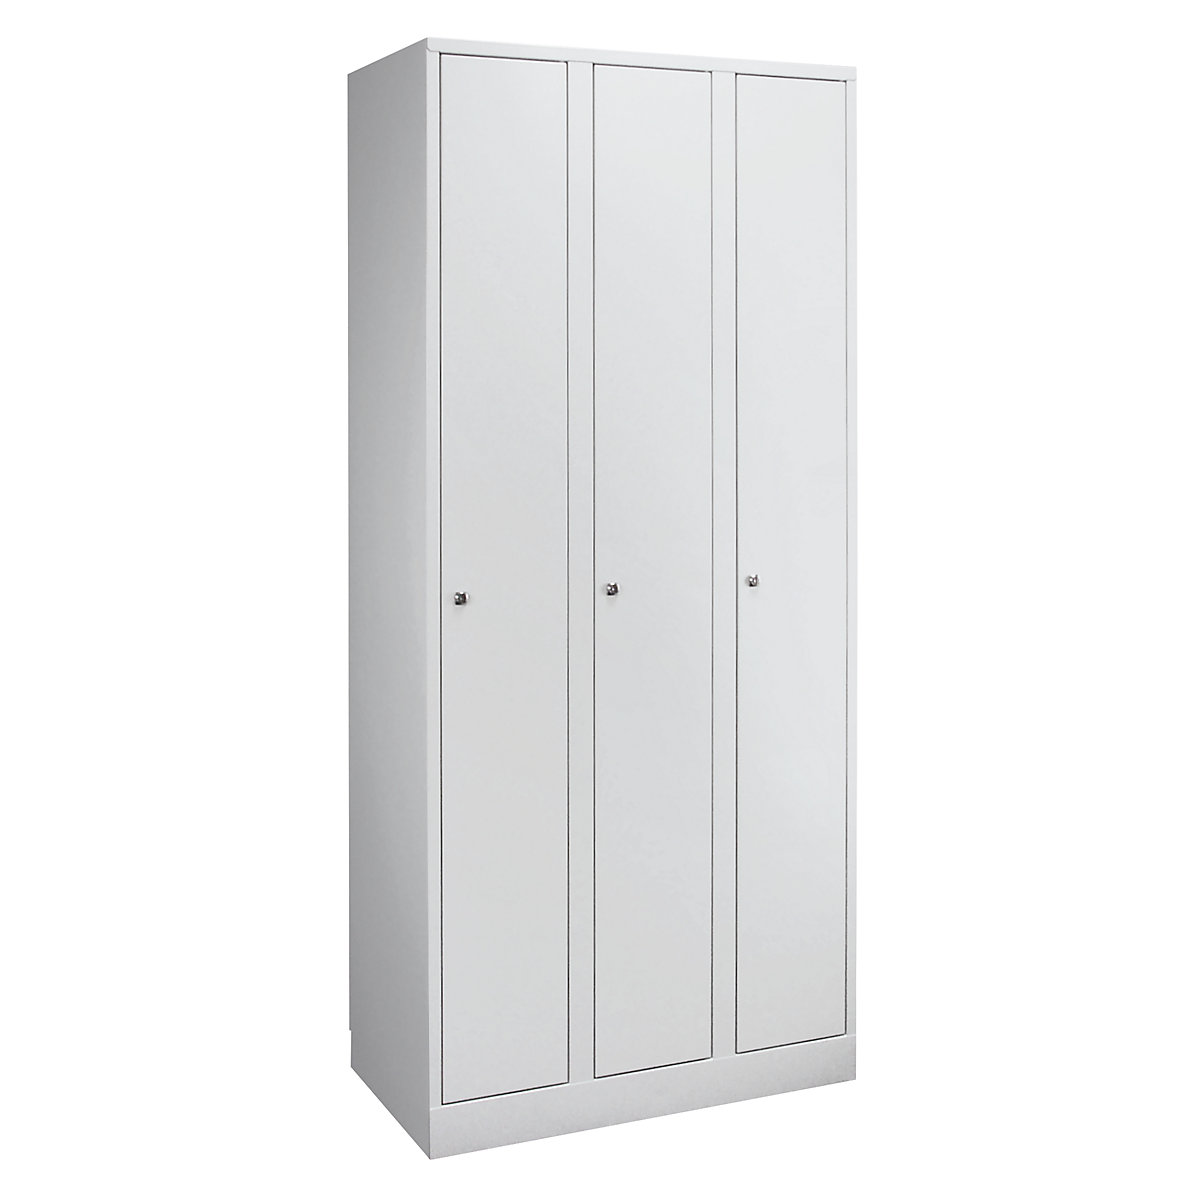 Wardrobe in practical sizes – Wolf, 3 compartments, compartment width 400 mm, light grey / light grey-5